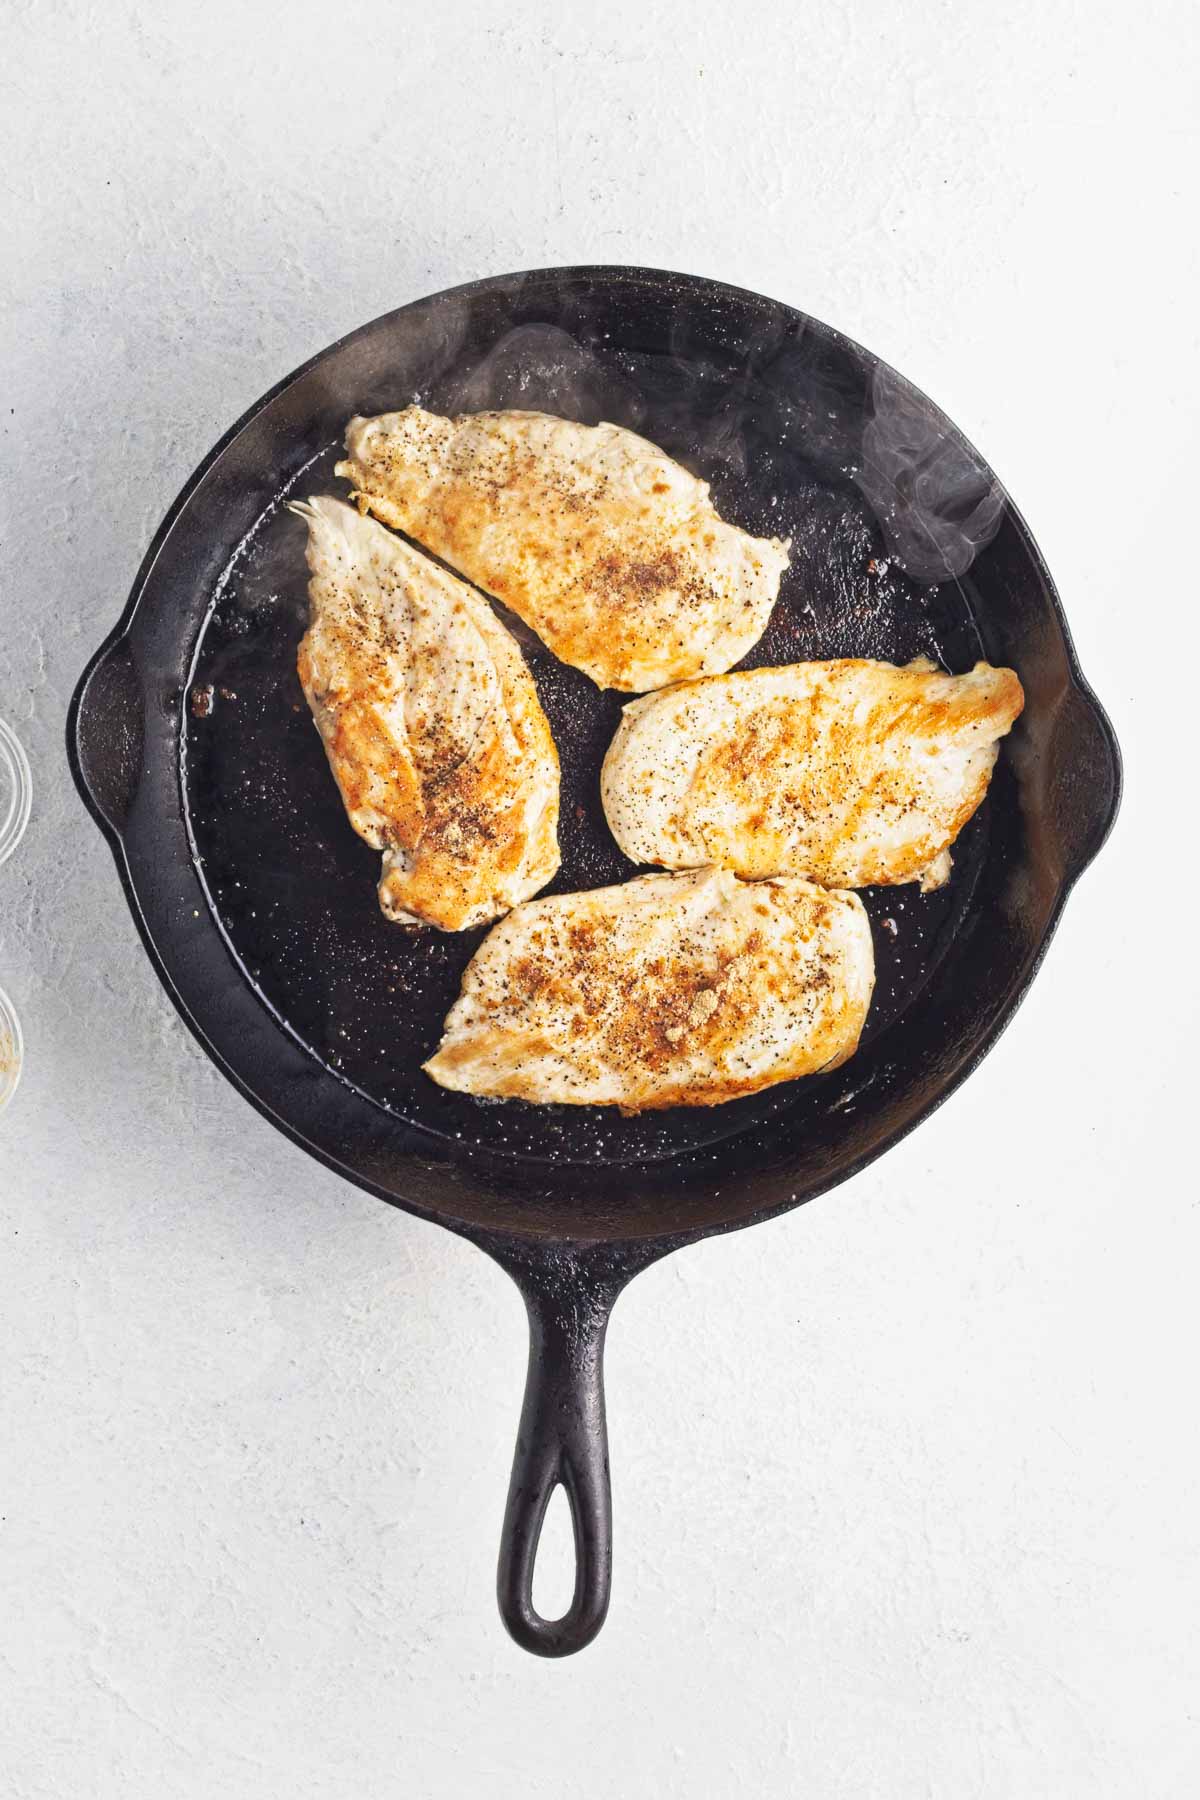 Browned thin-sliced chicken breasts in a skillet